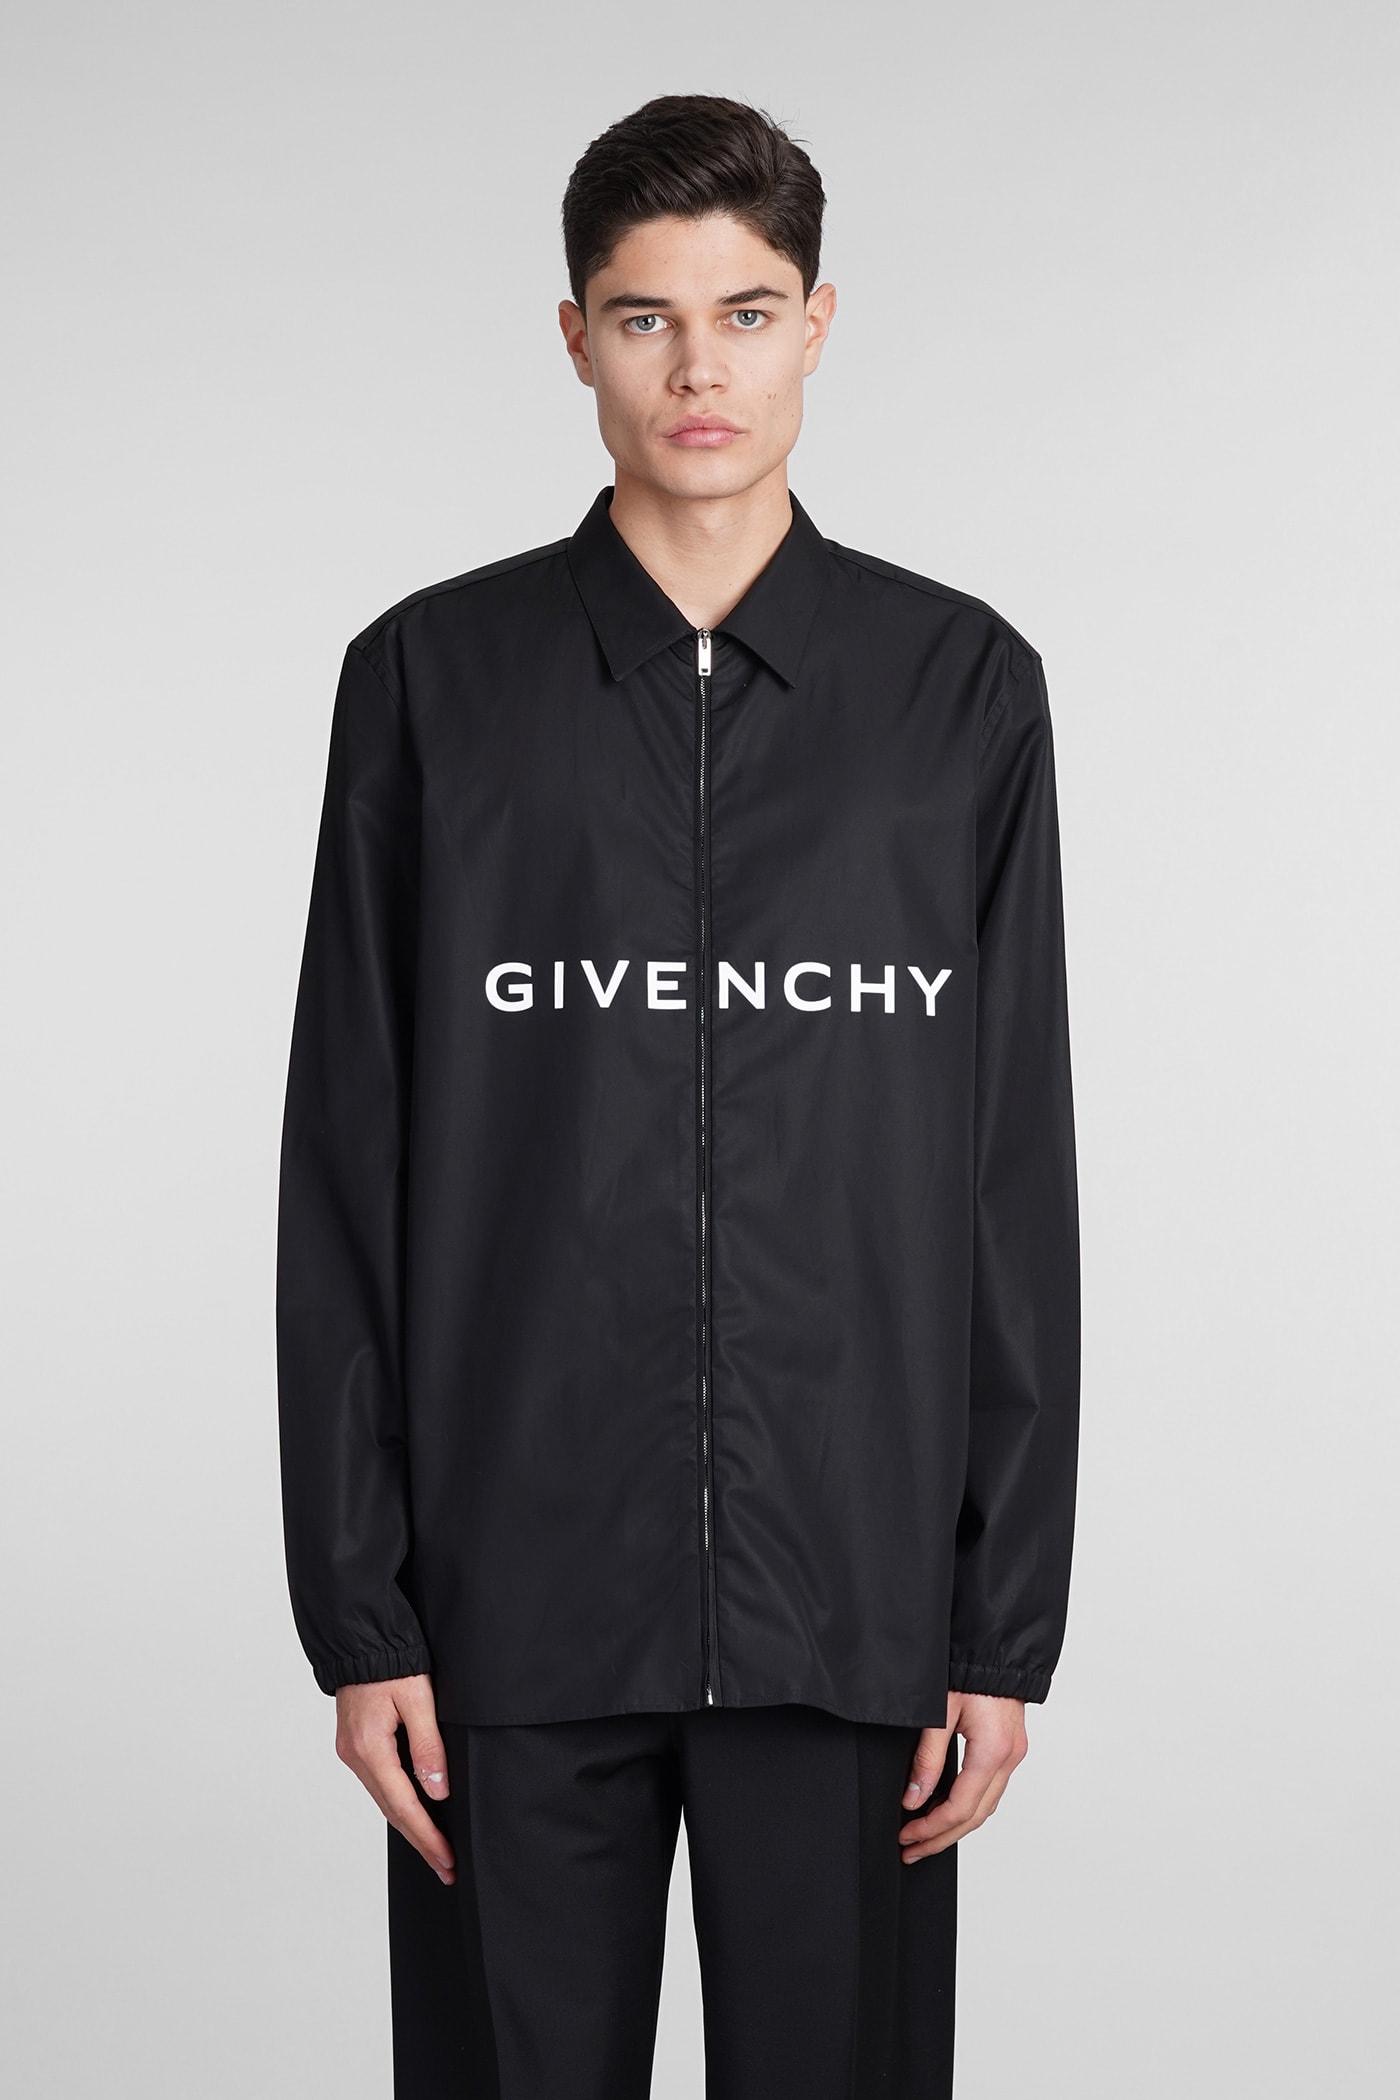 Givenchy Shirt In Black Cotton